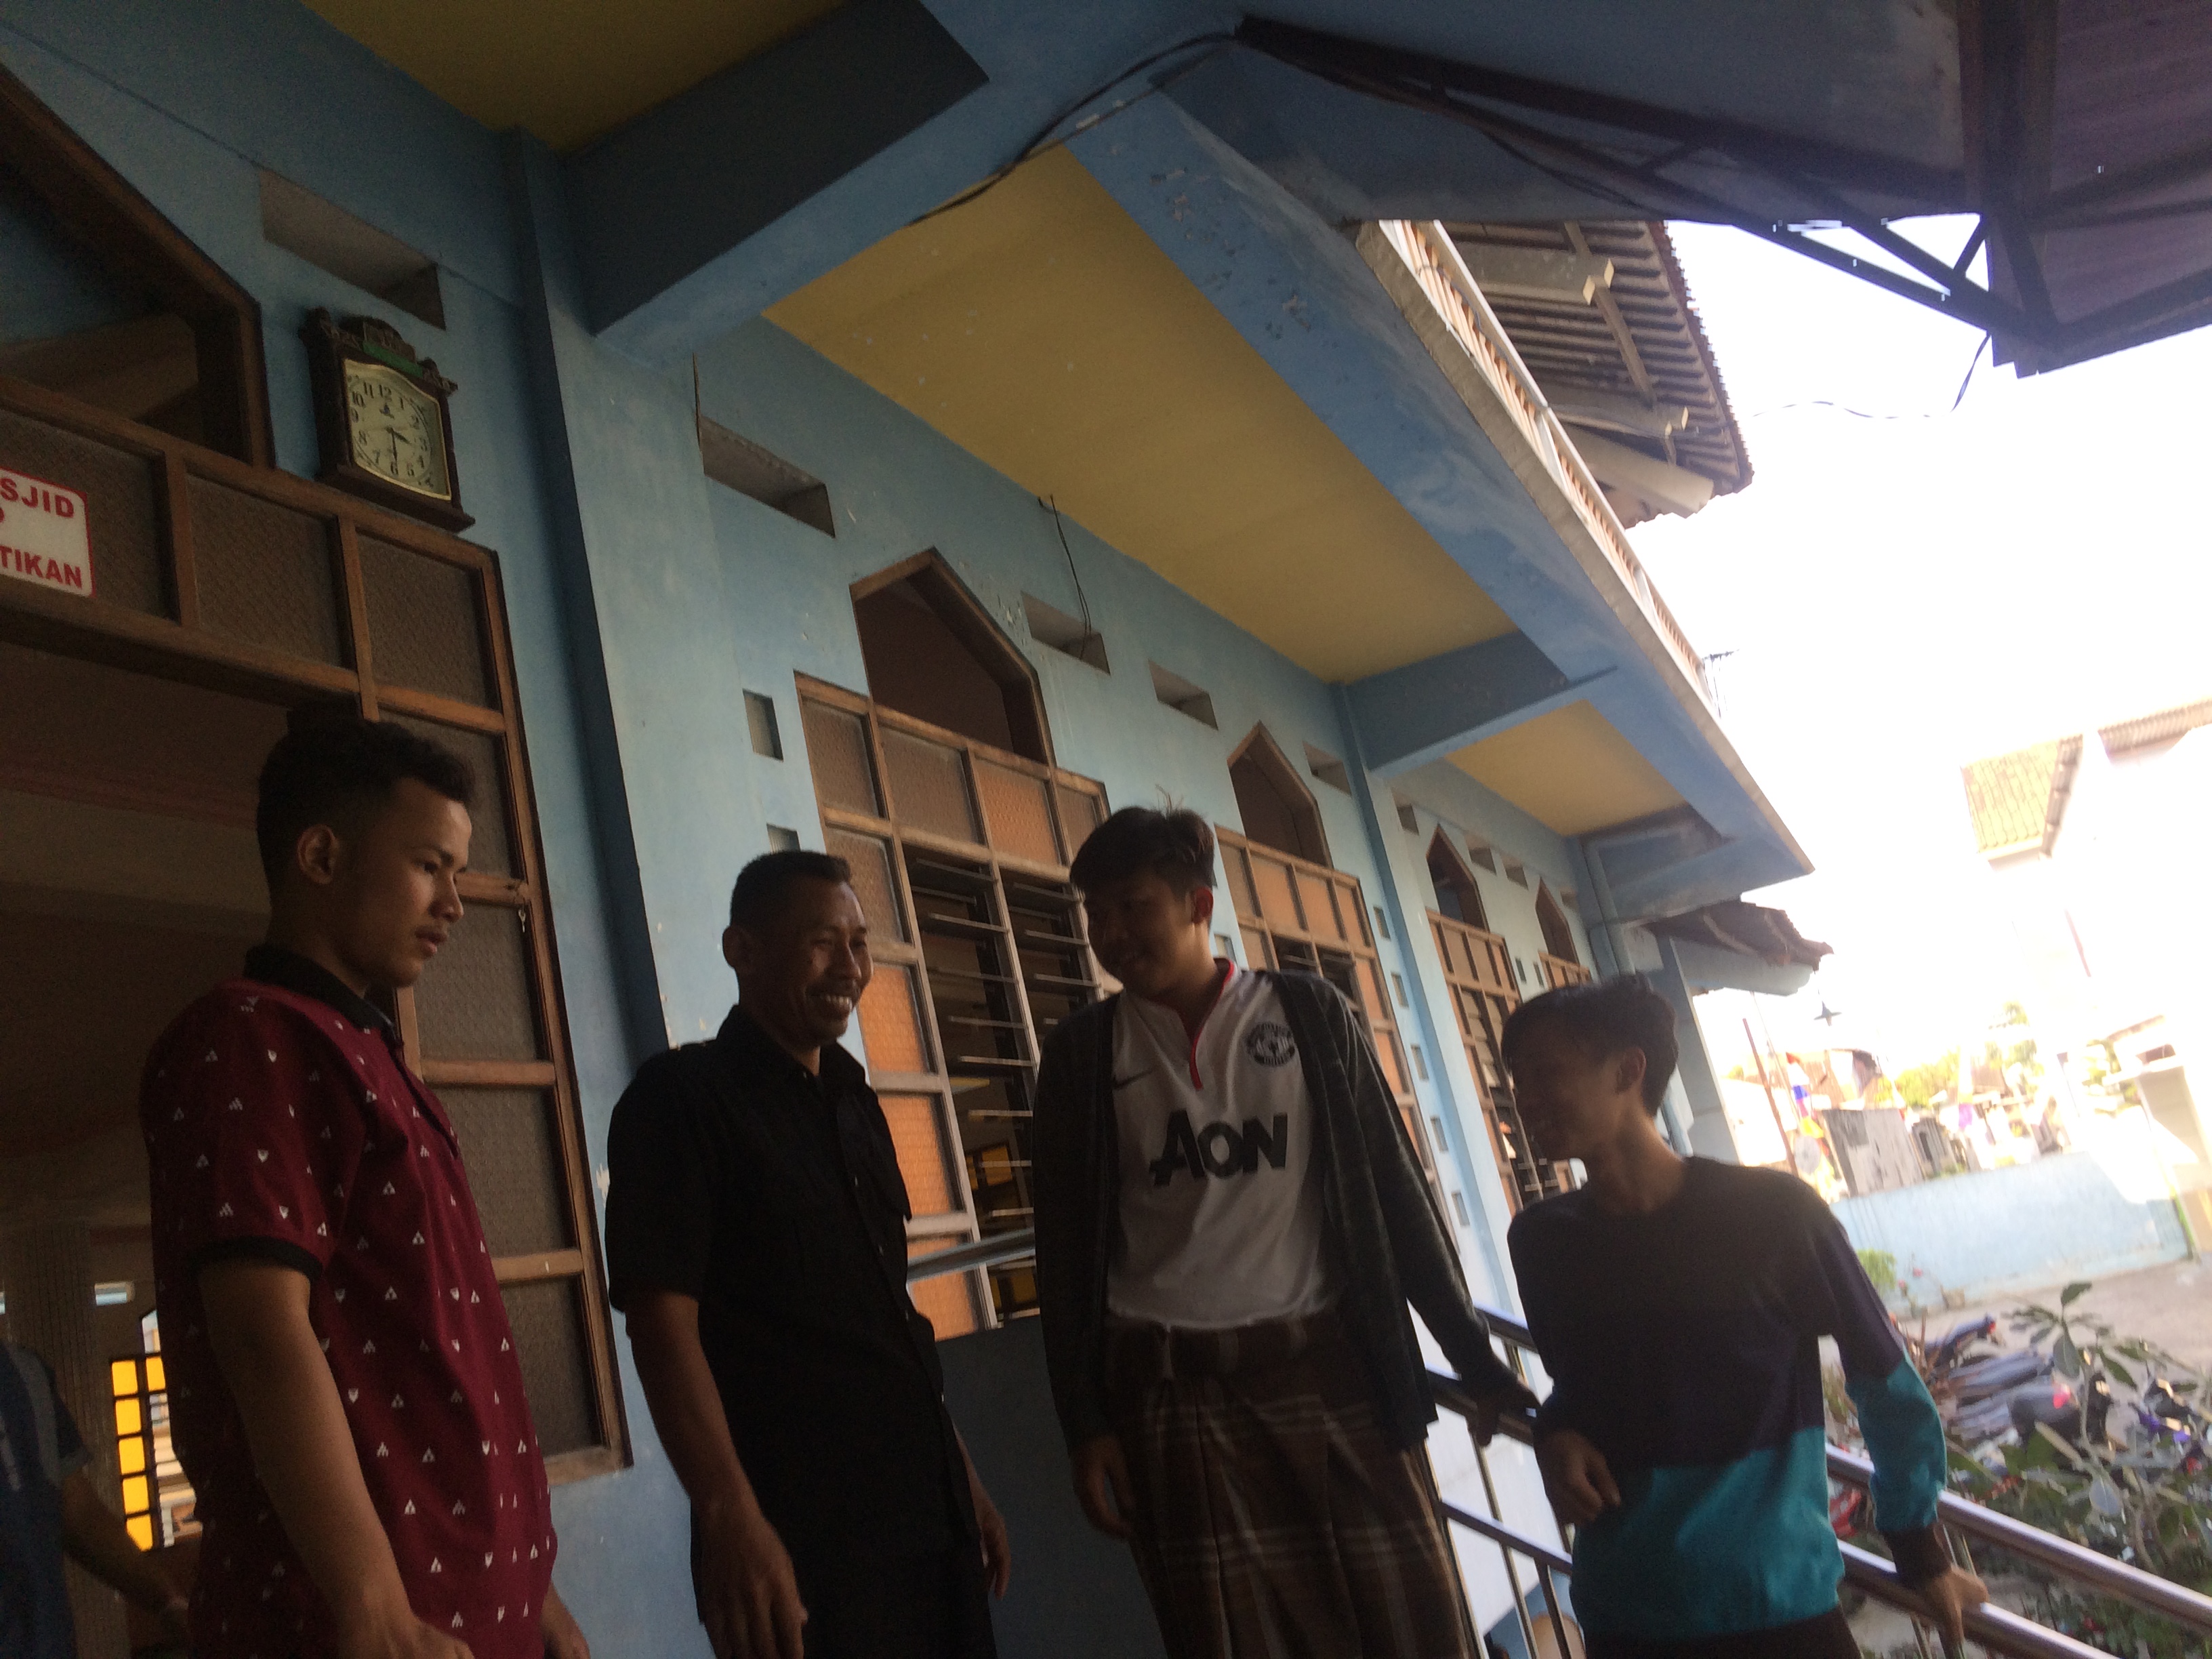 Pesantren boarders and the headmeaster (2nd from the left).